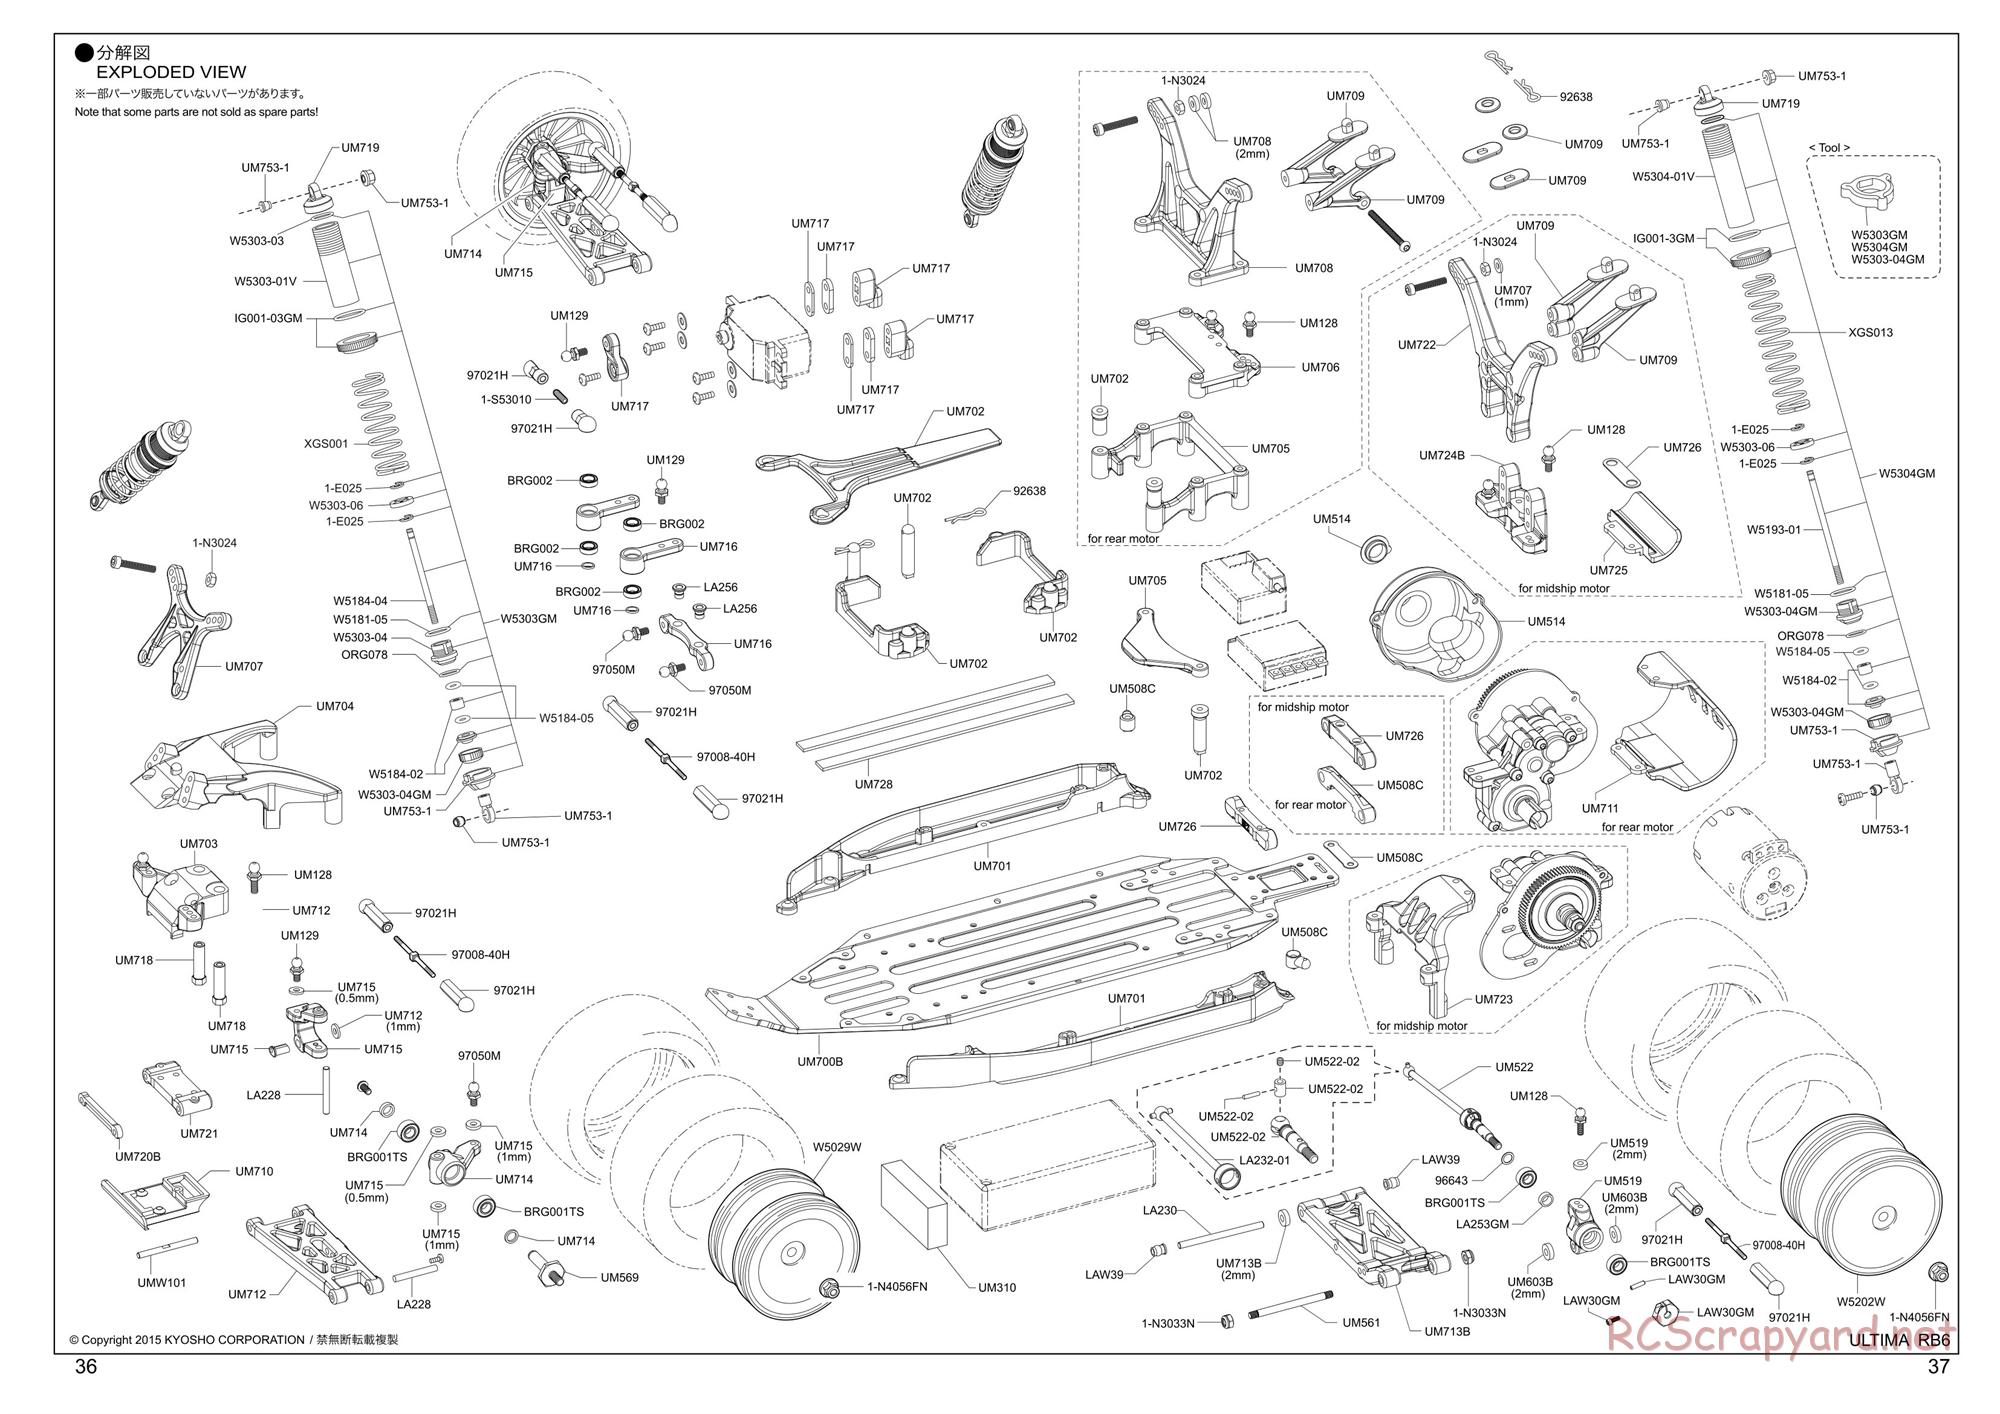 Kyosho - Ultima RB6 (2015) - Manual - Page 36